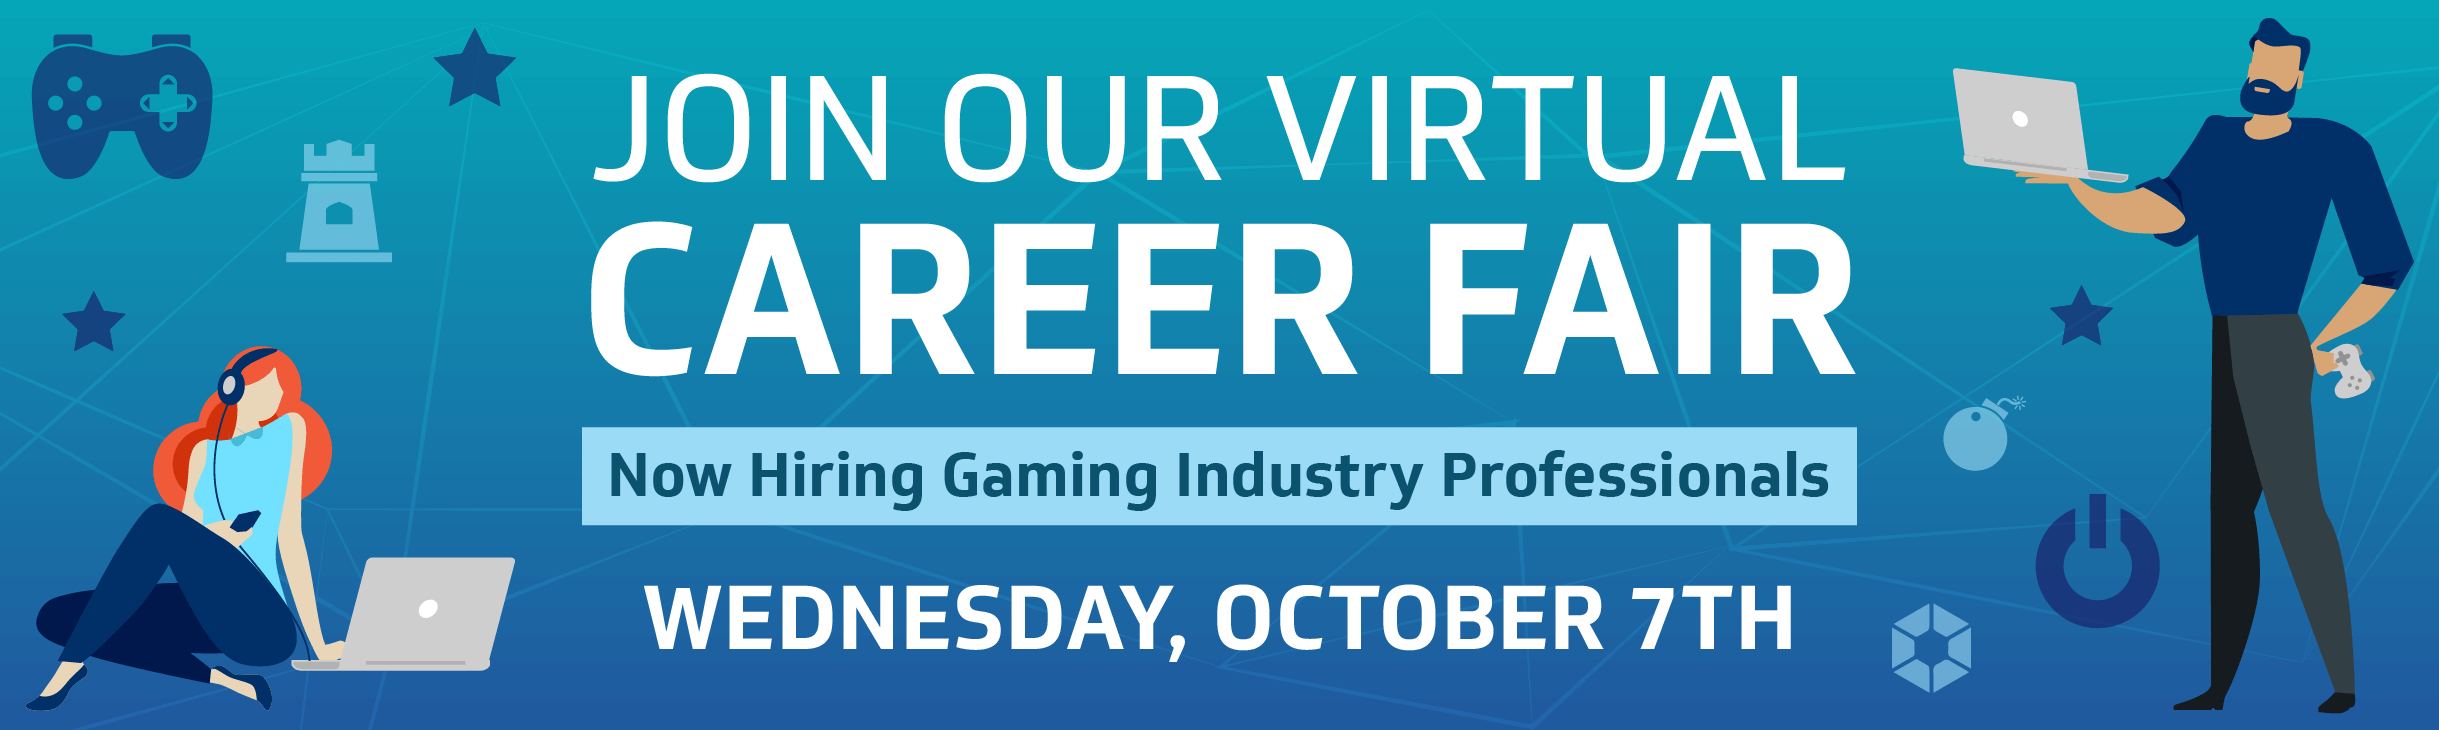 Join Our Virtual Career Fair on October 7th